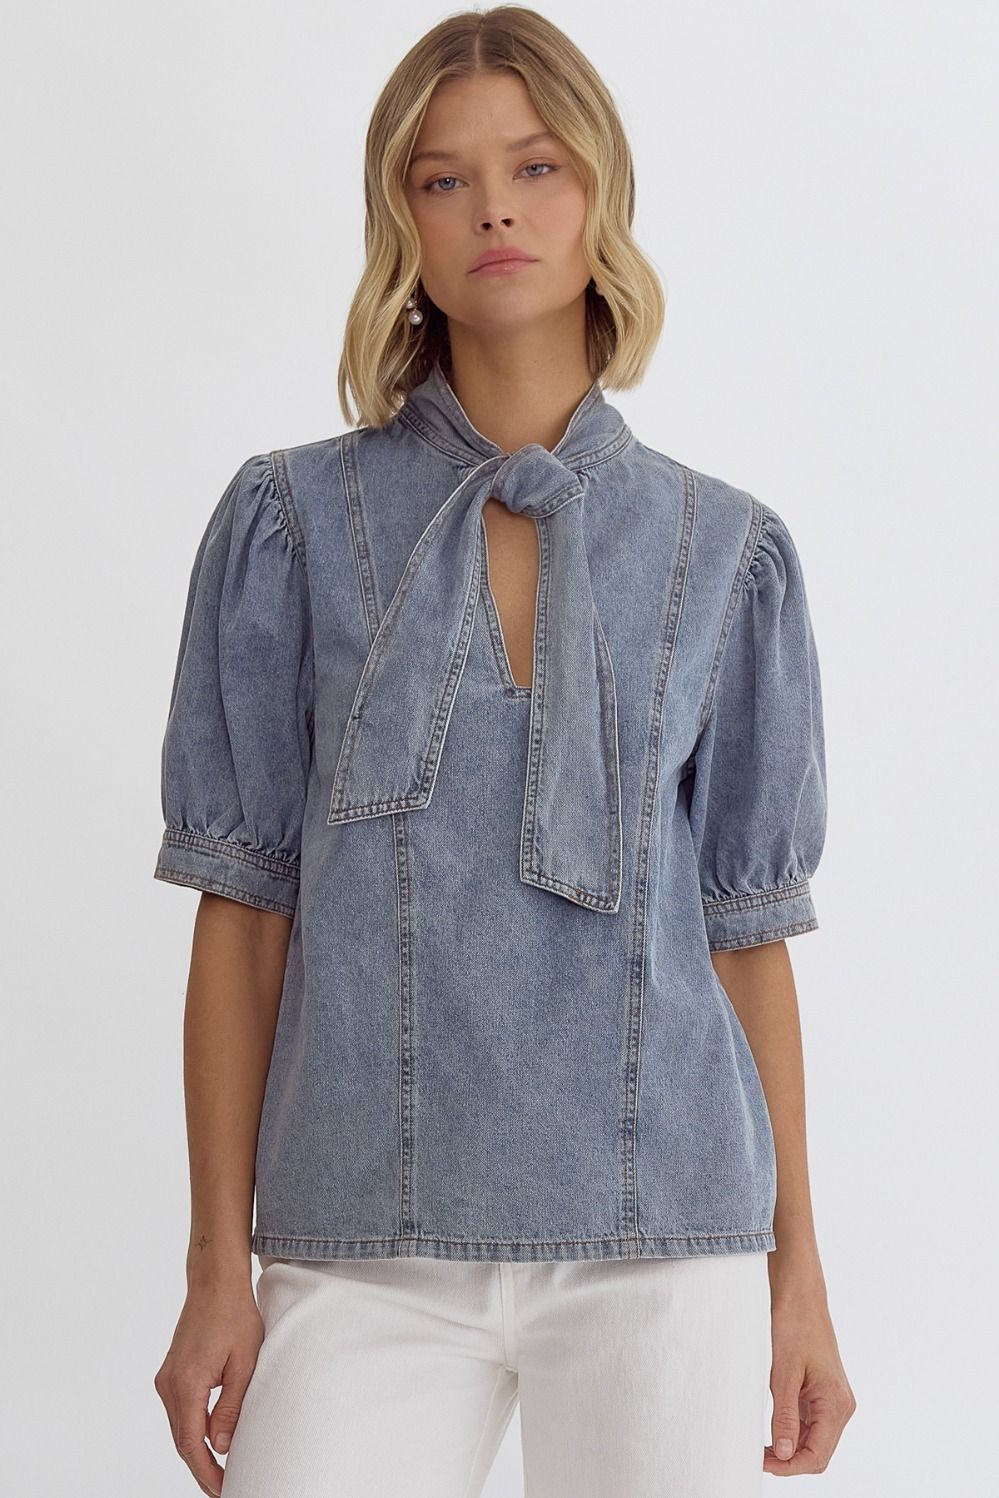 Solid denim mock neck short sleeve top with bow